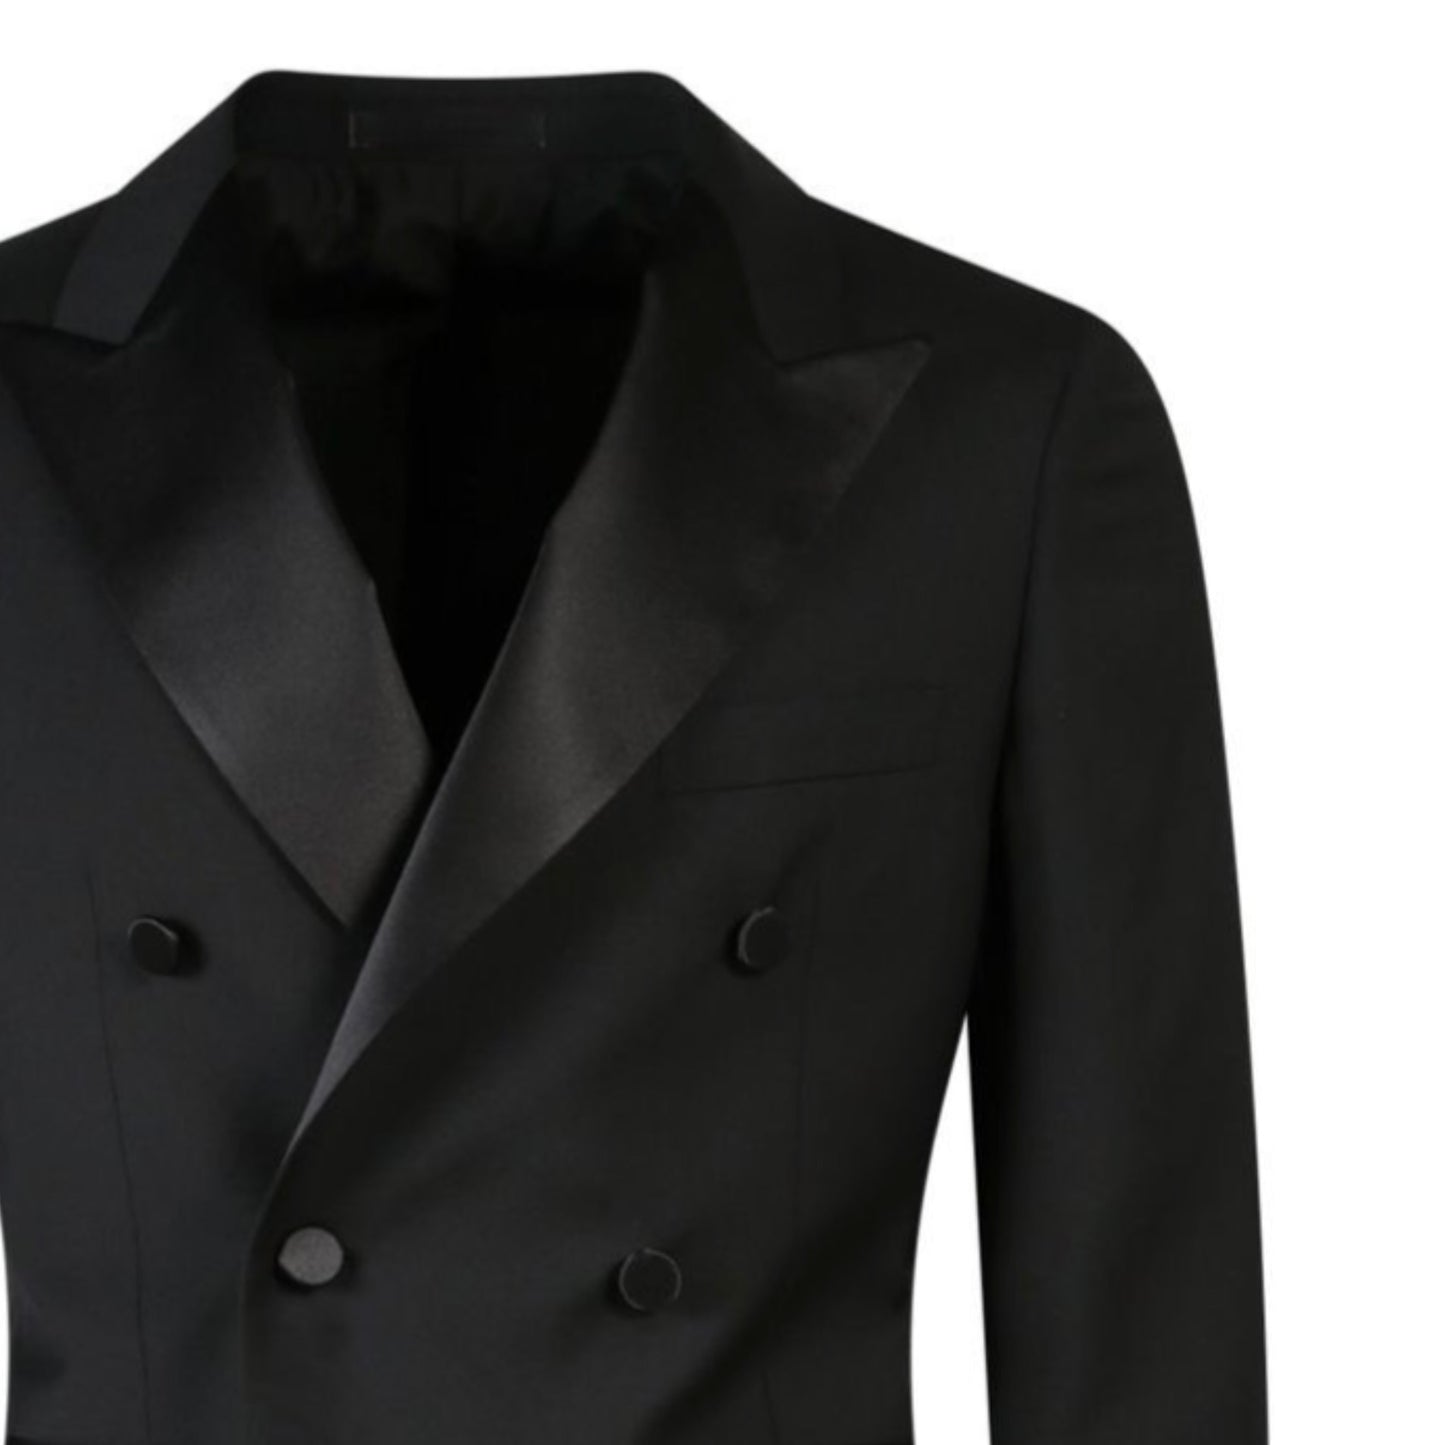 2H black peaked Lapel Double breasted Suit 2 Pieces